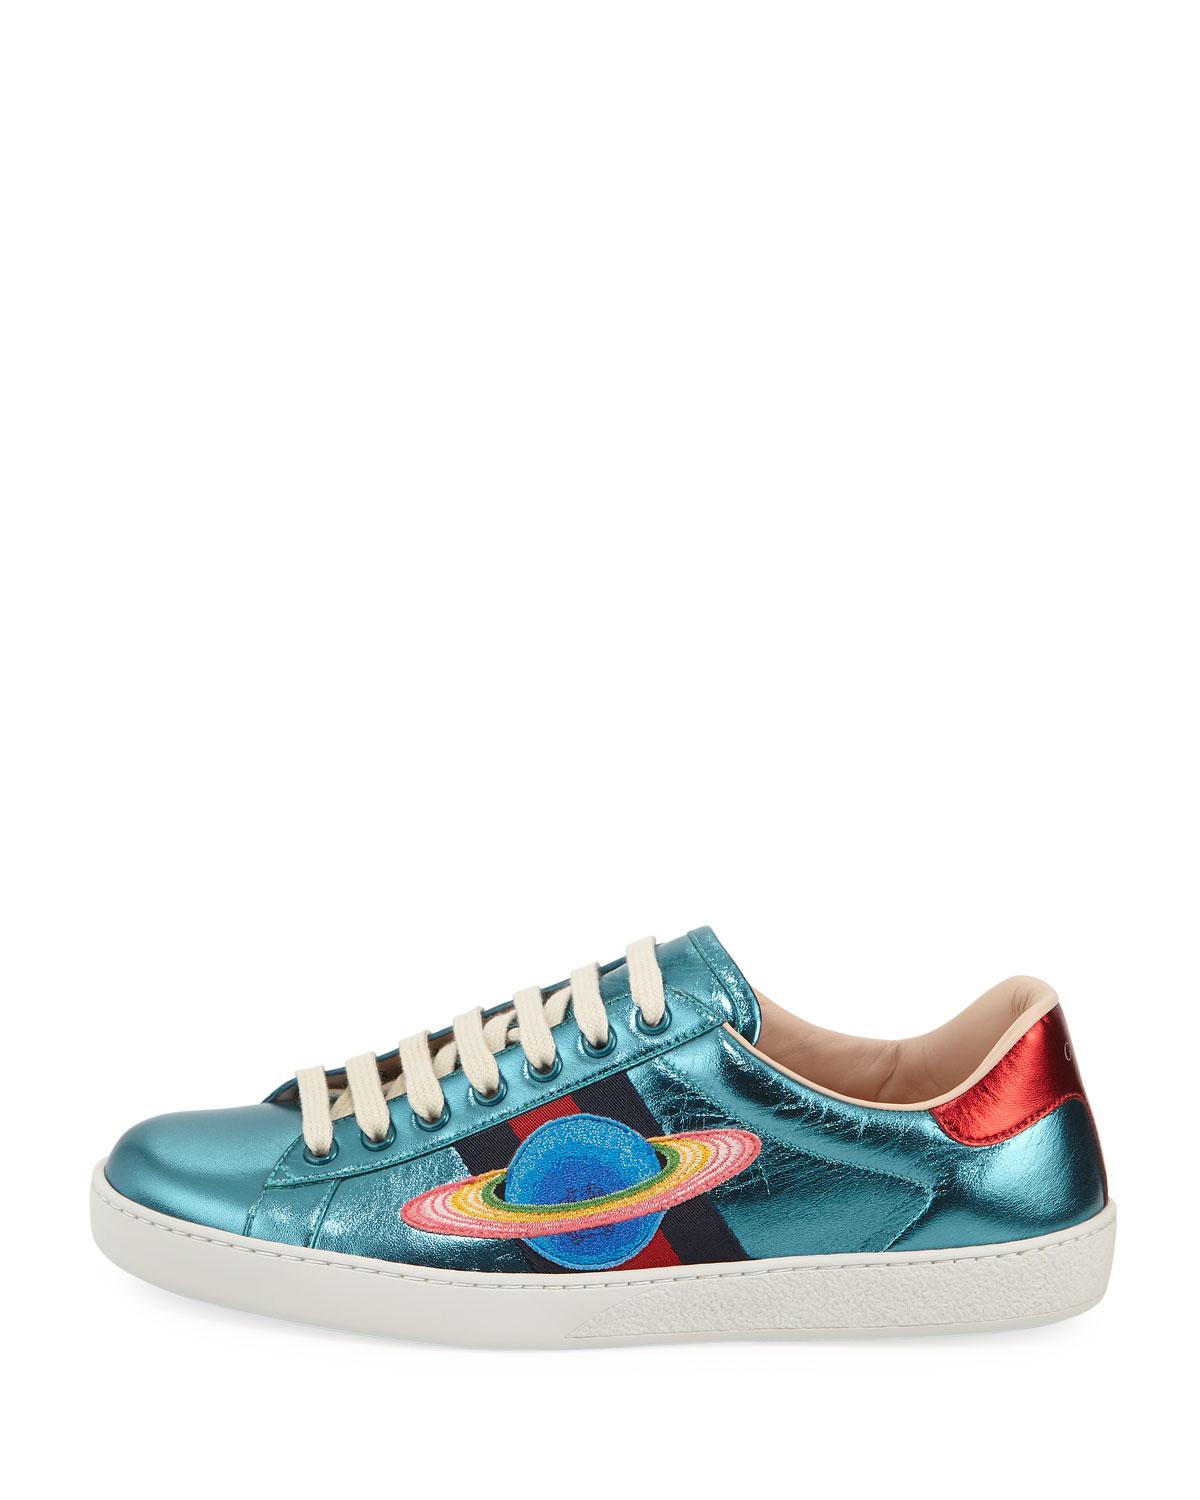 Gucci Ace Metallic Leather Sneaker - Lyst